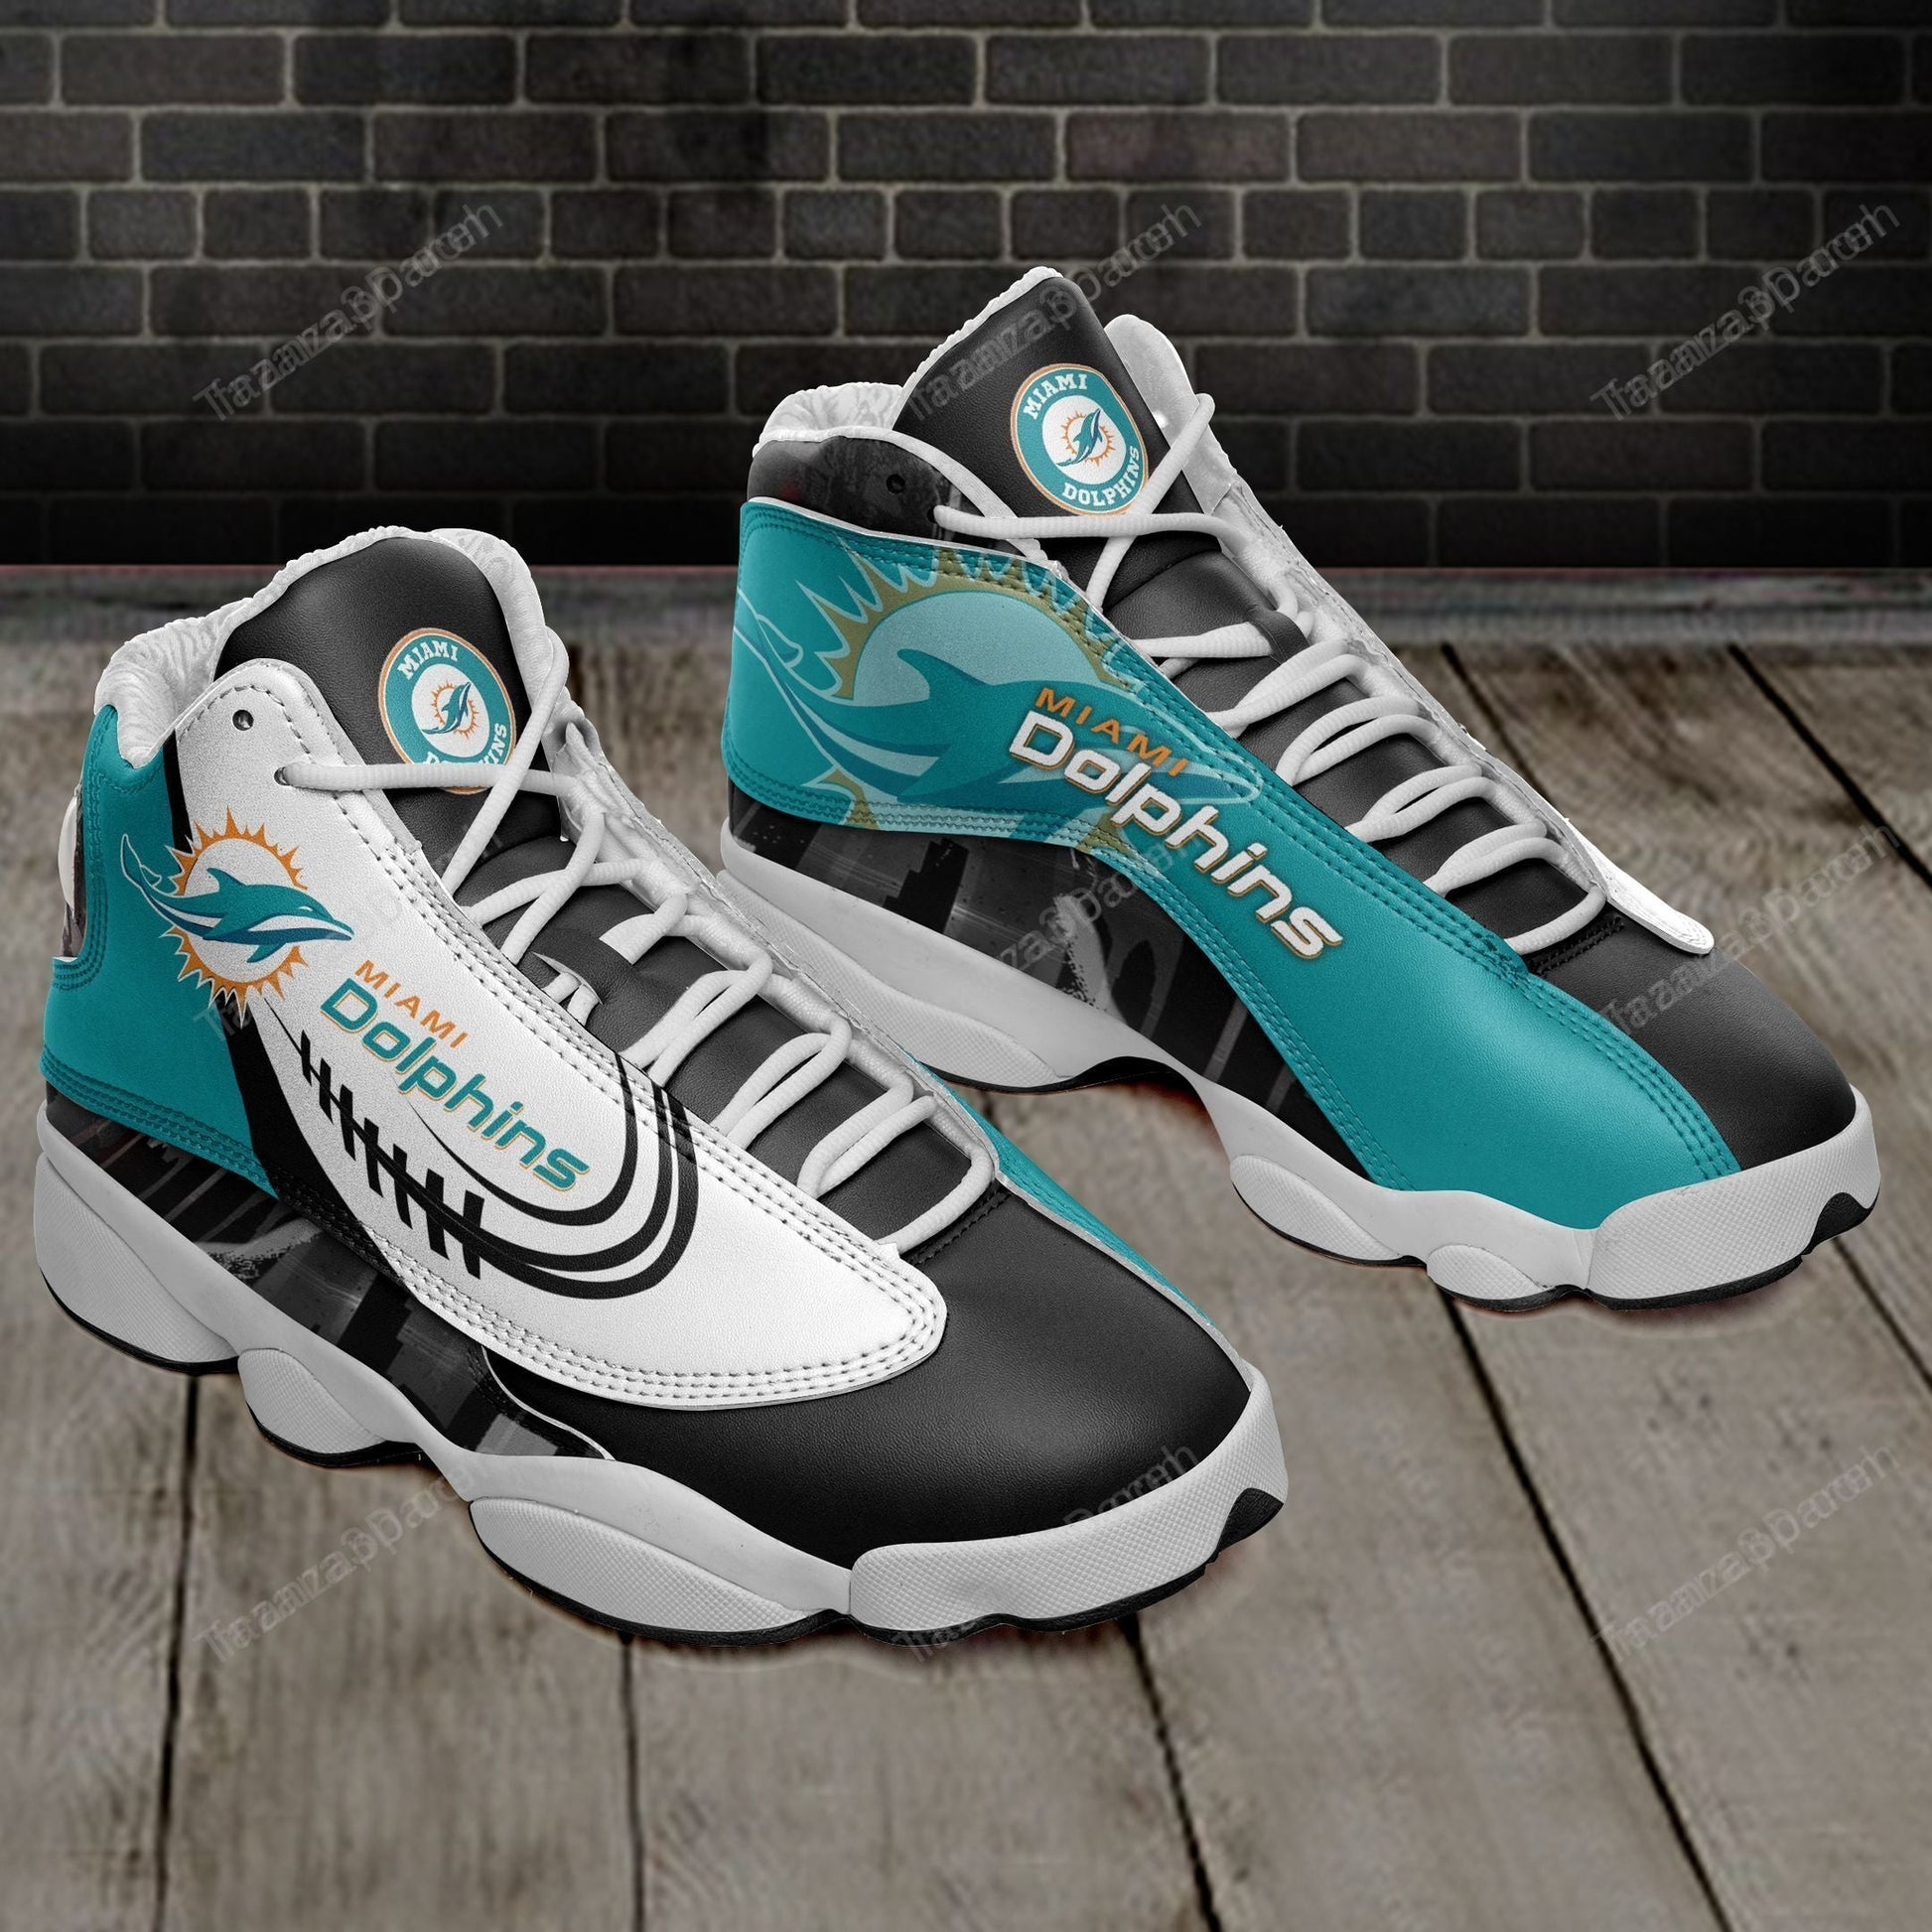 Miami Dolphins Custom Shoes Sneakers 457-Gear Wanta